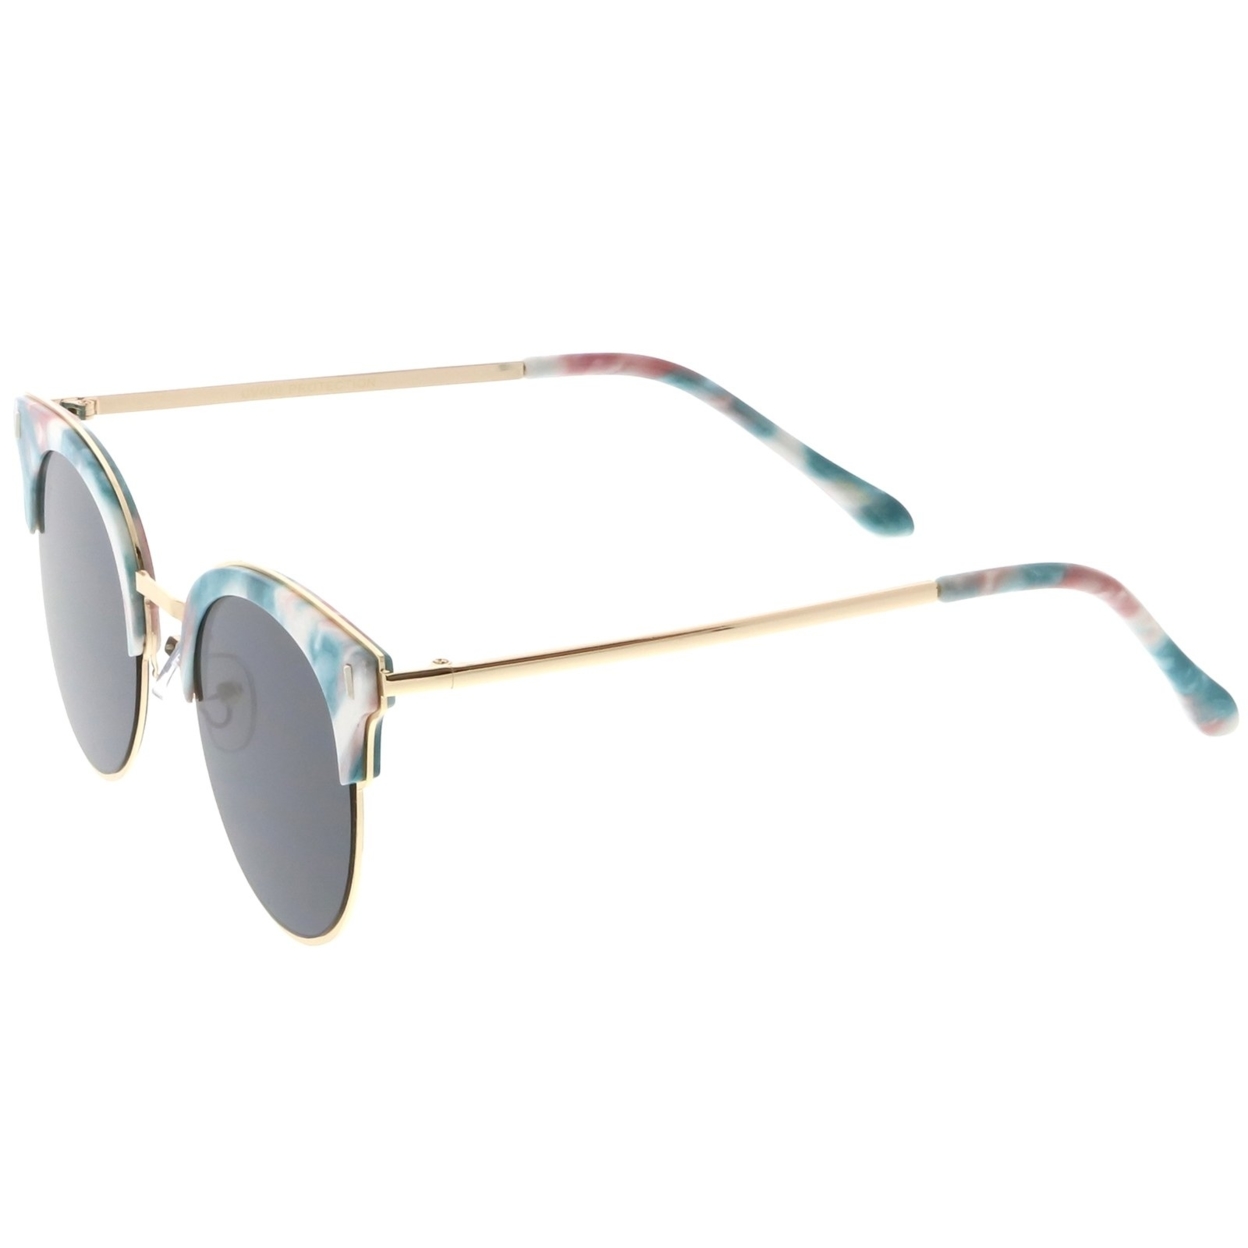 Semi Rimless Marble Print Round Cat Eye Sunglasses With Flat Lens 48mm - Blue Red Gold / Smoke